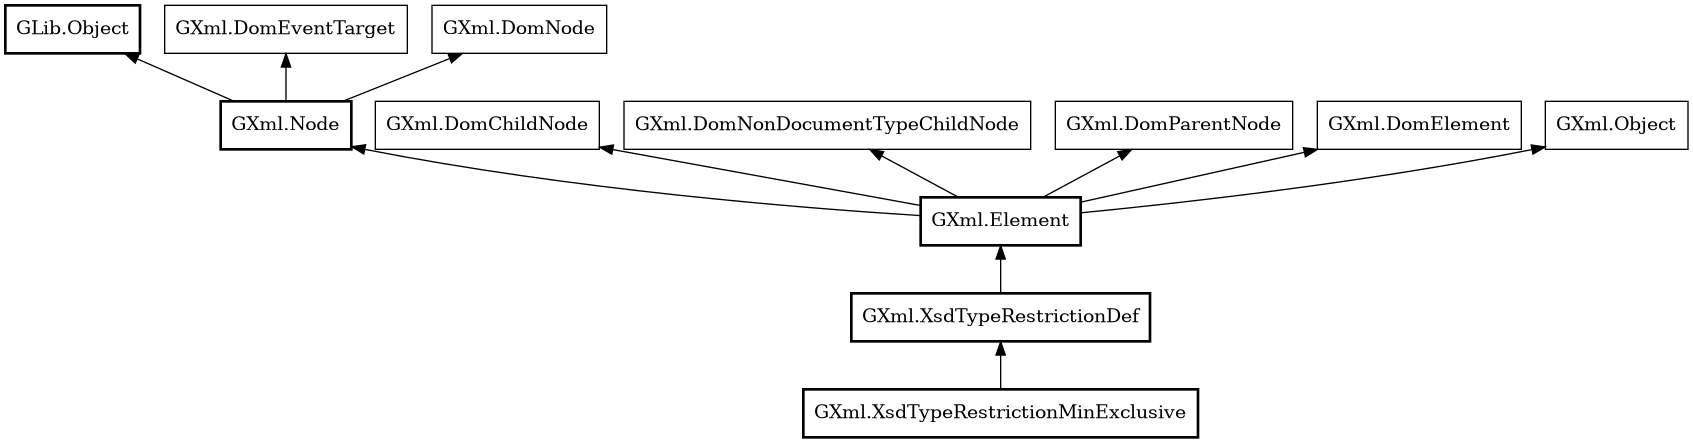 Object hierarchy for XsdTypeRestrictionMinExclusive